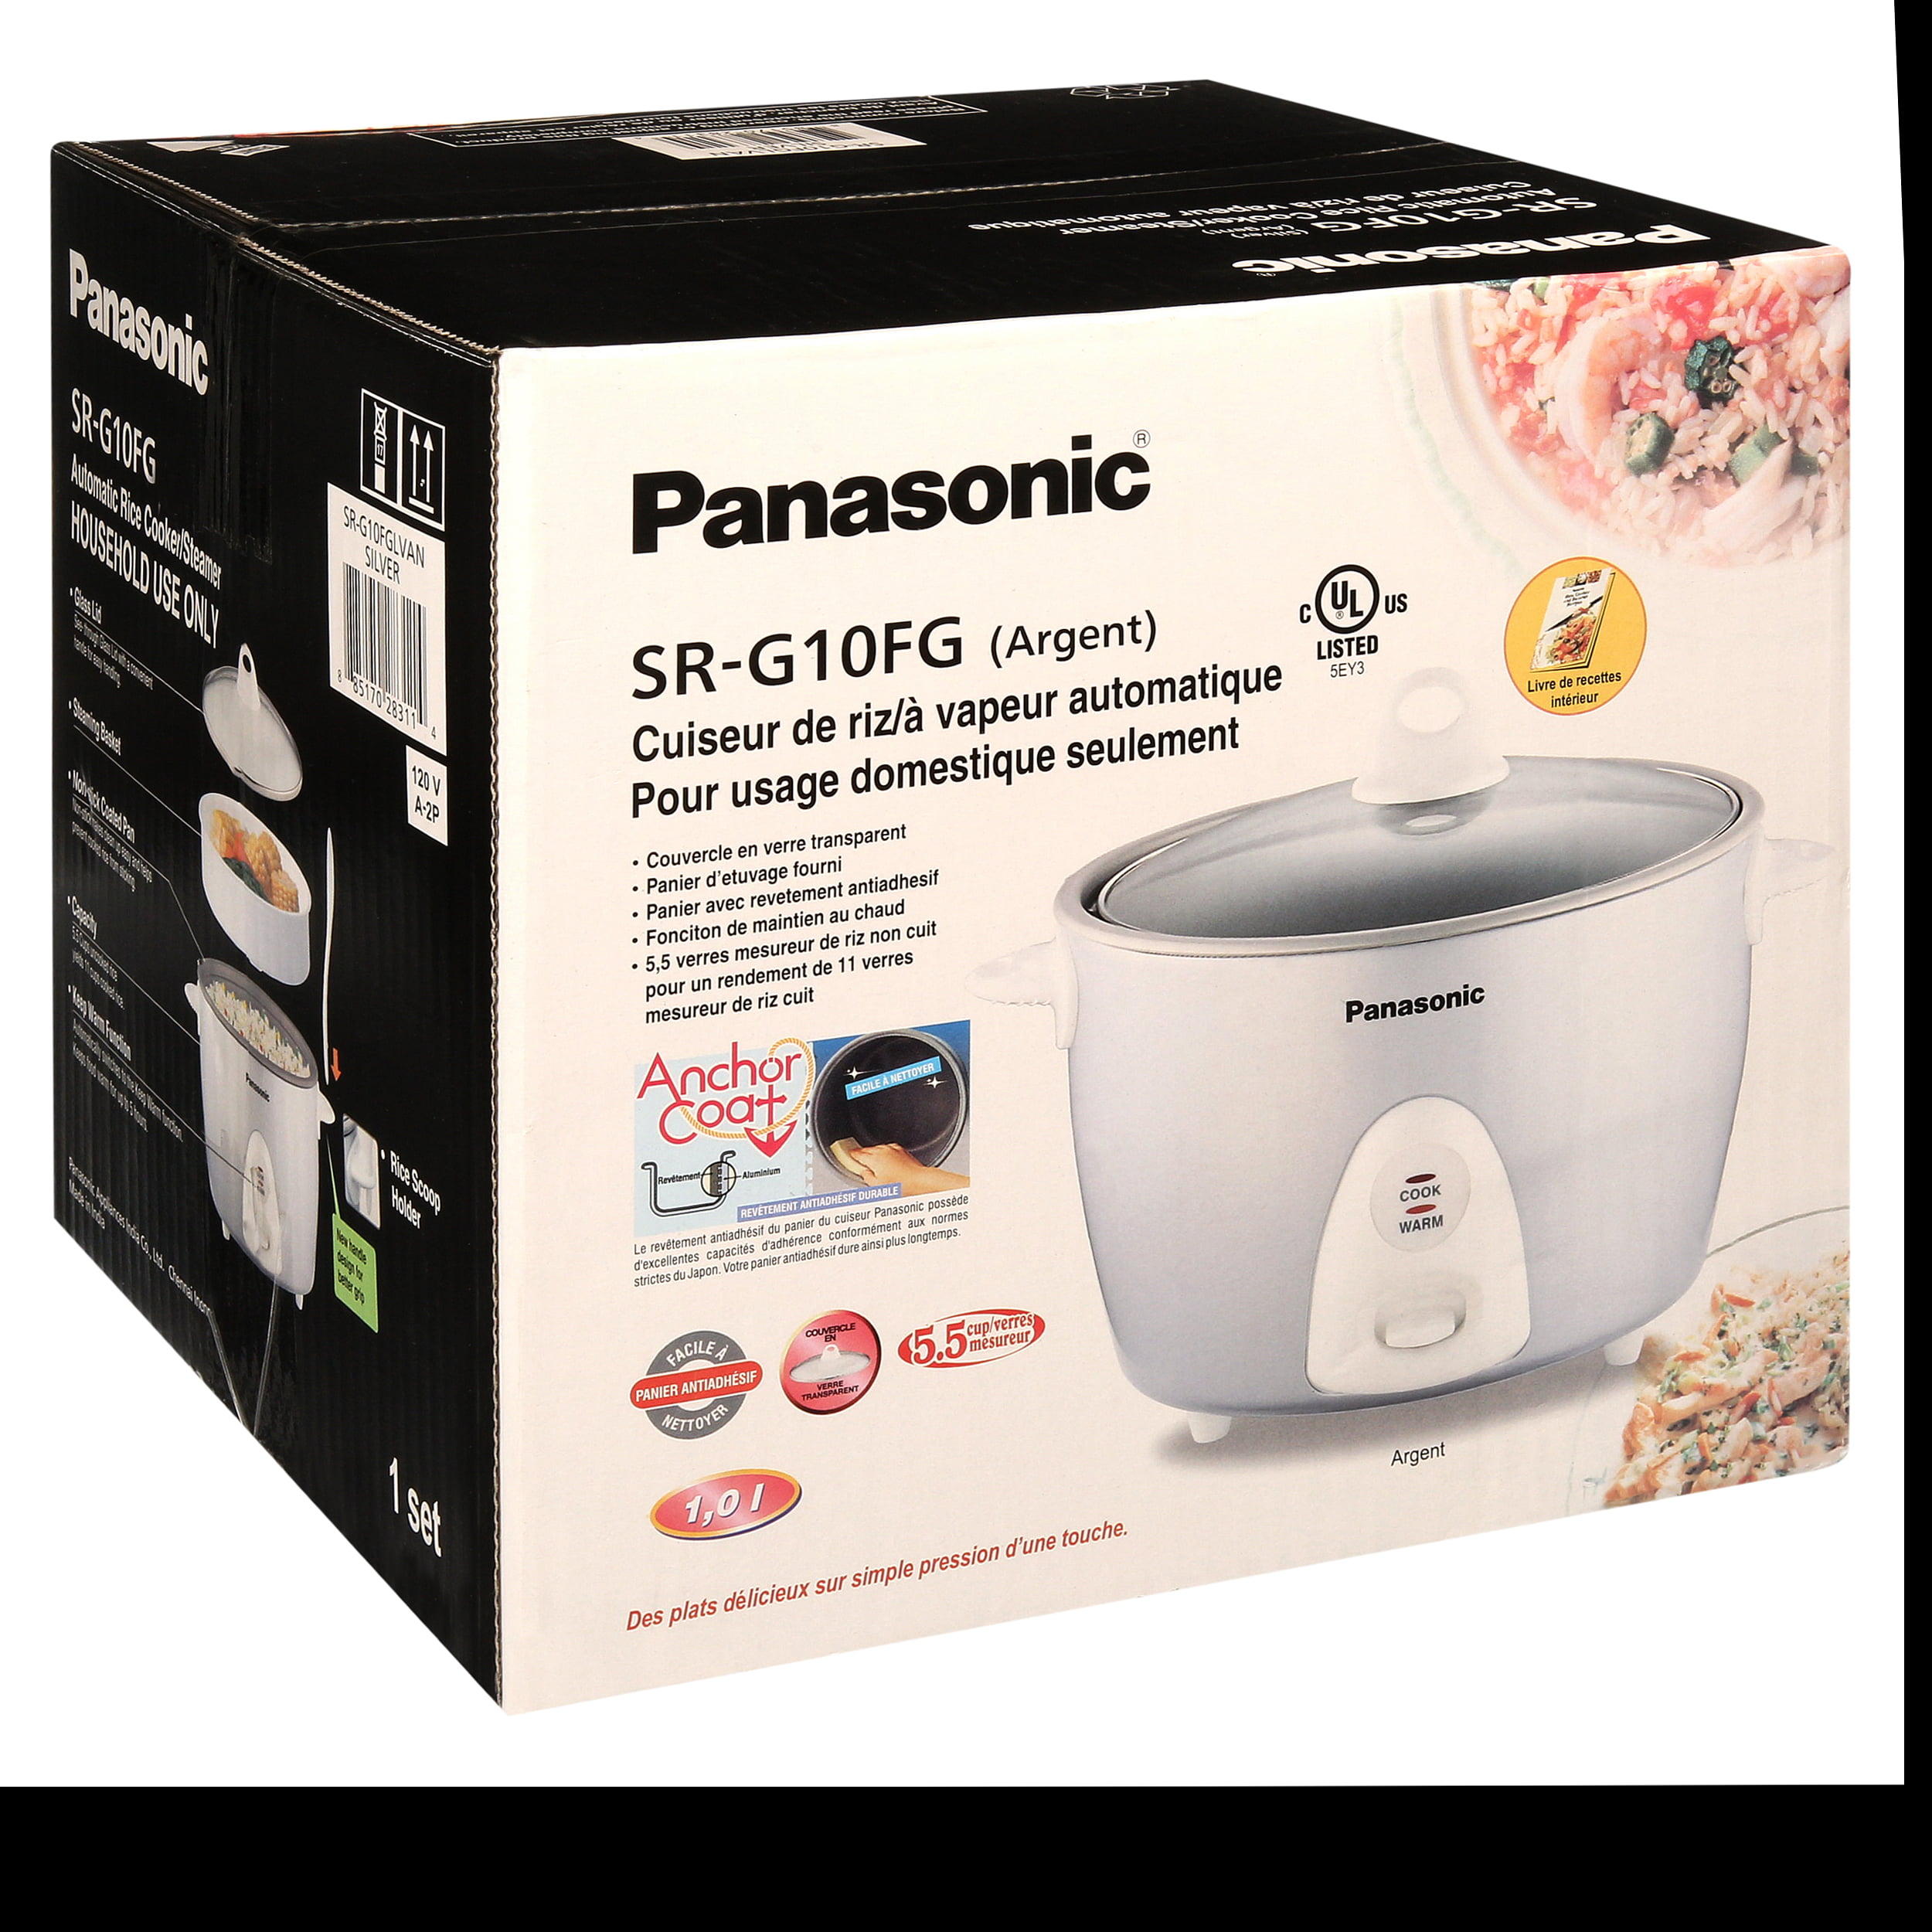 Panasonic Rice Cooker, Steamer & Multi-Cooker, 3-Cups (Cooked), 1.5-Cups  (Uncooked), SR-3NAL – Silver